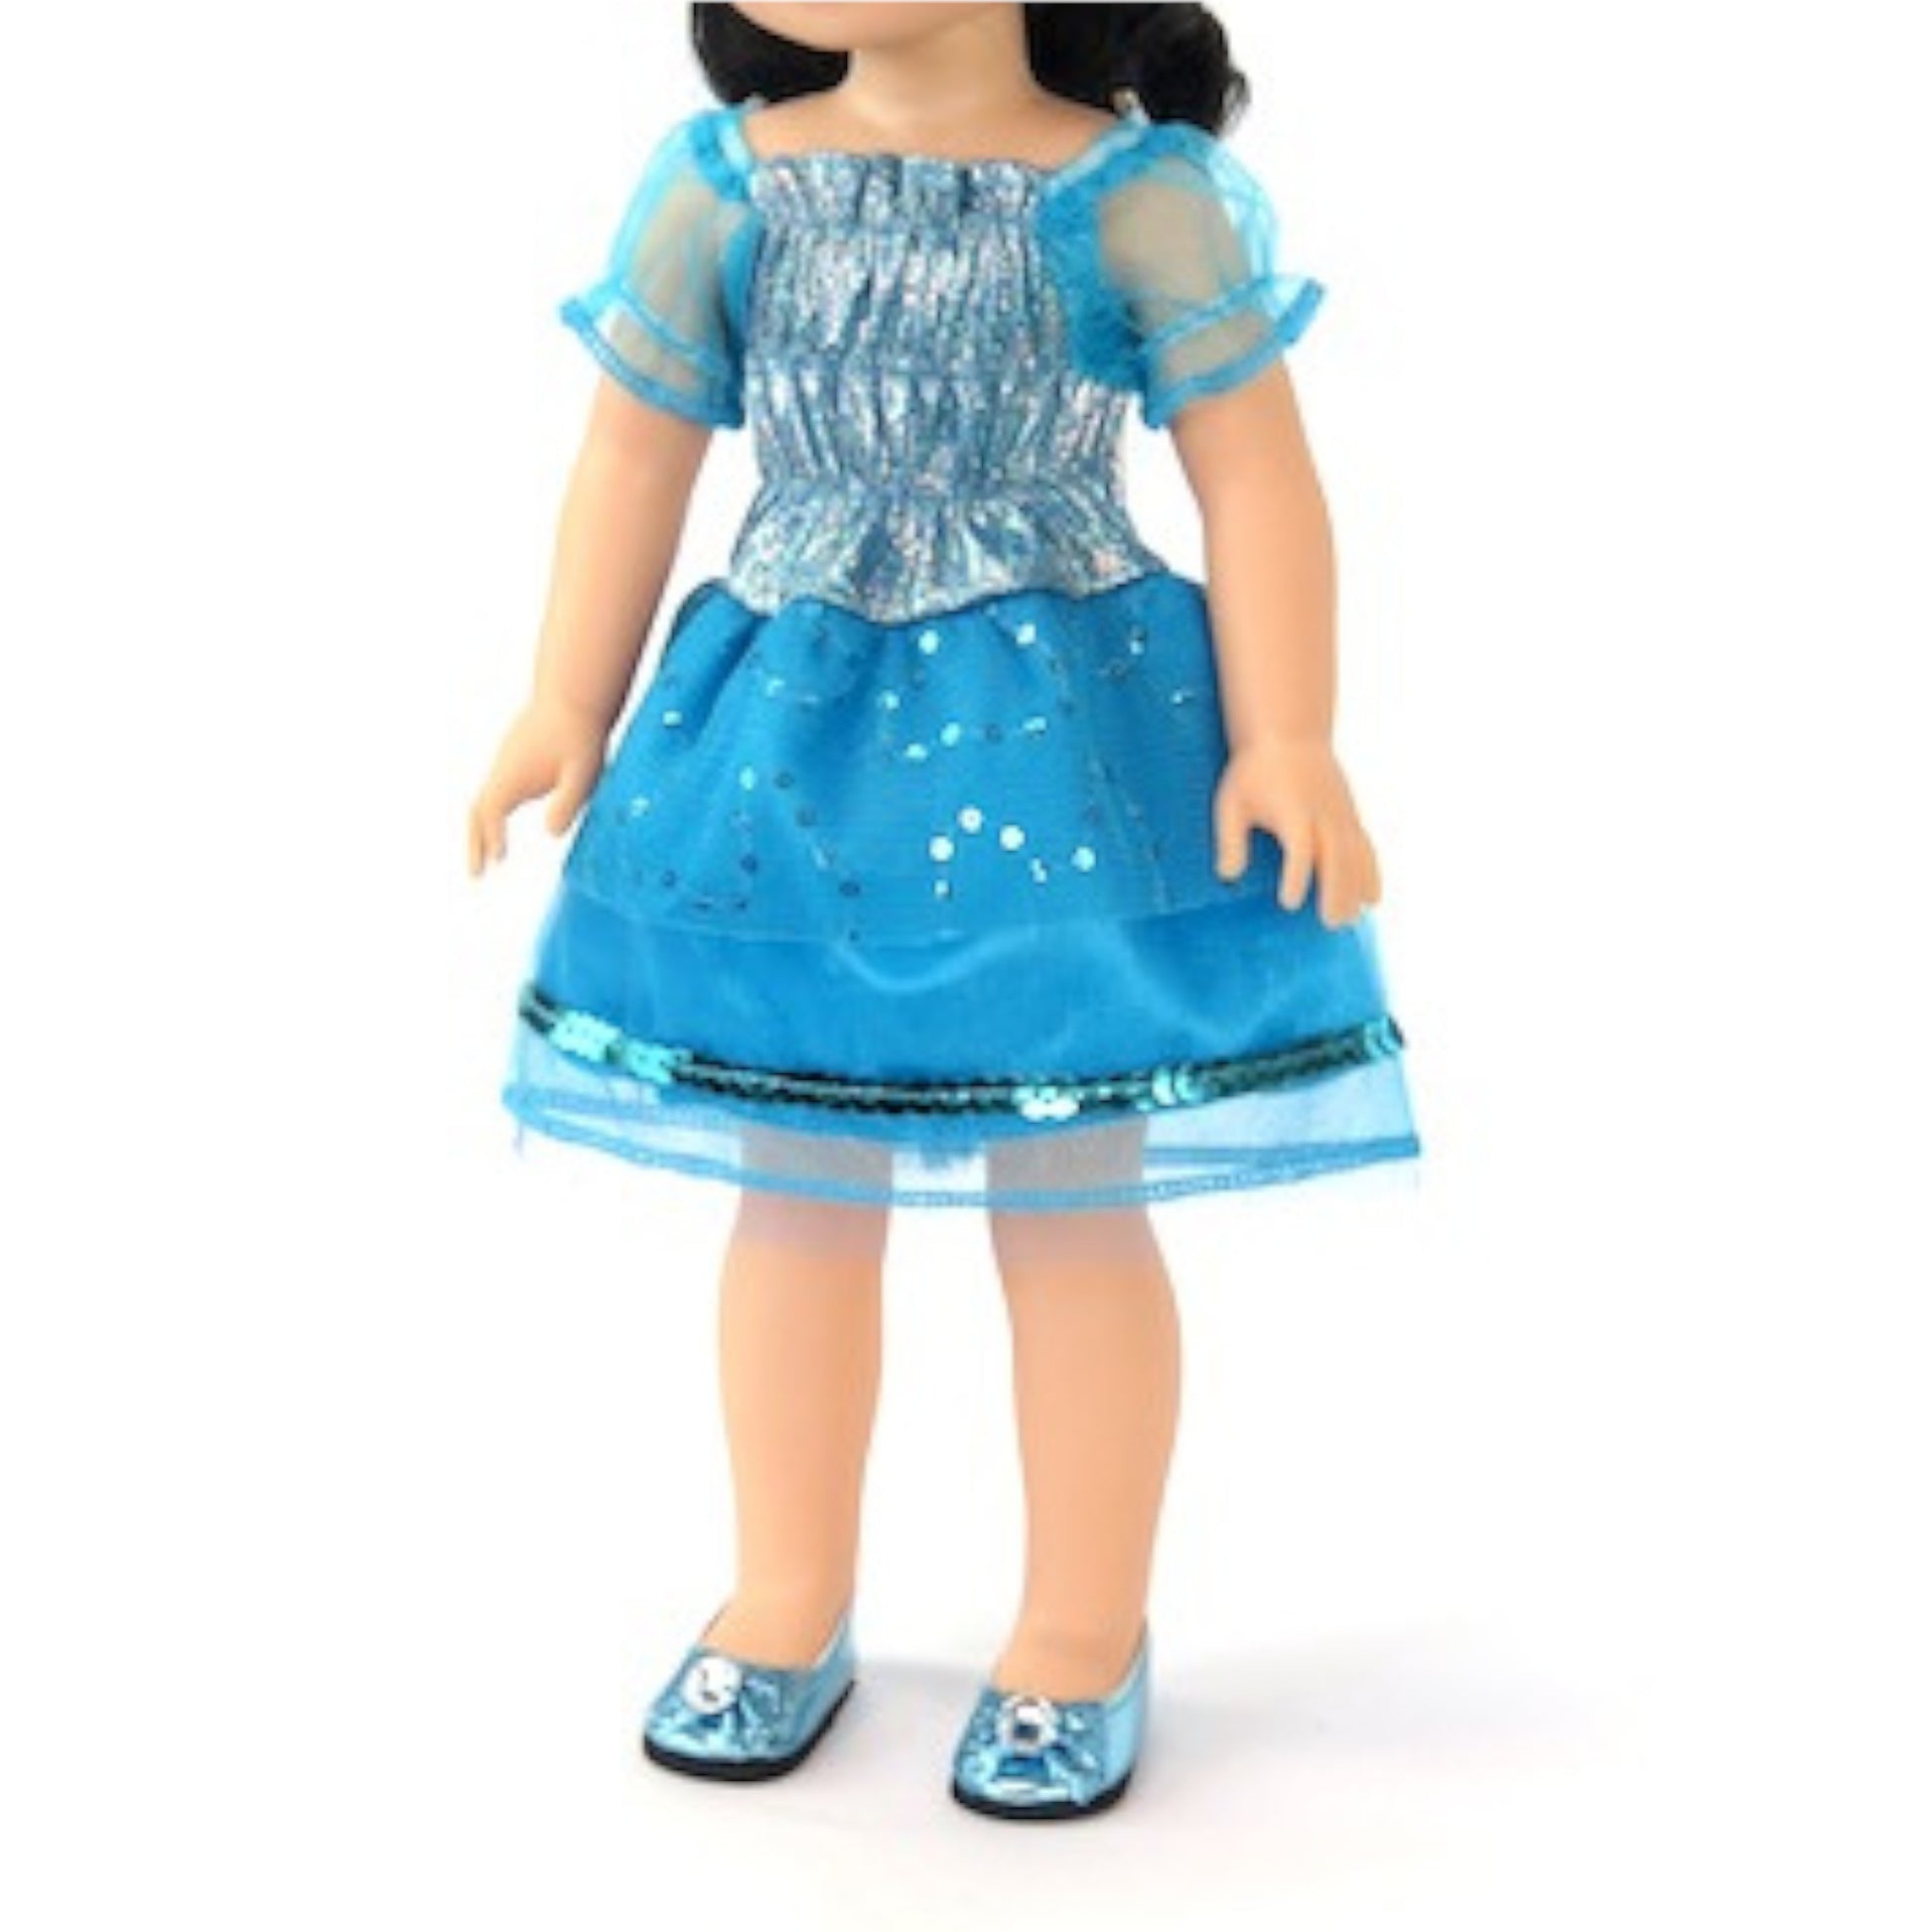 Little Blue Sparkly Dress for 14 1/2-inch dolls with doll Side view